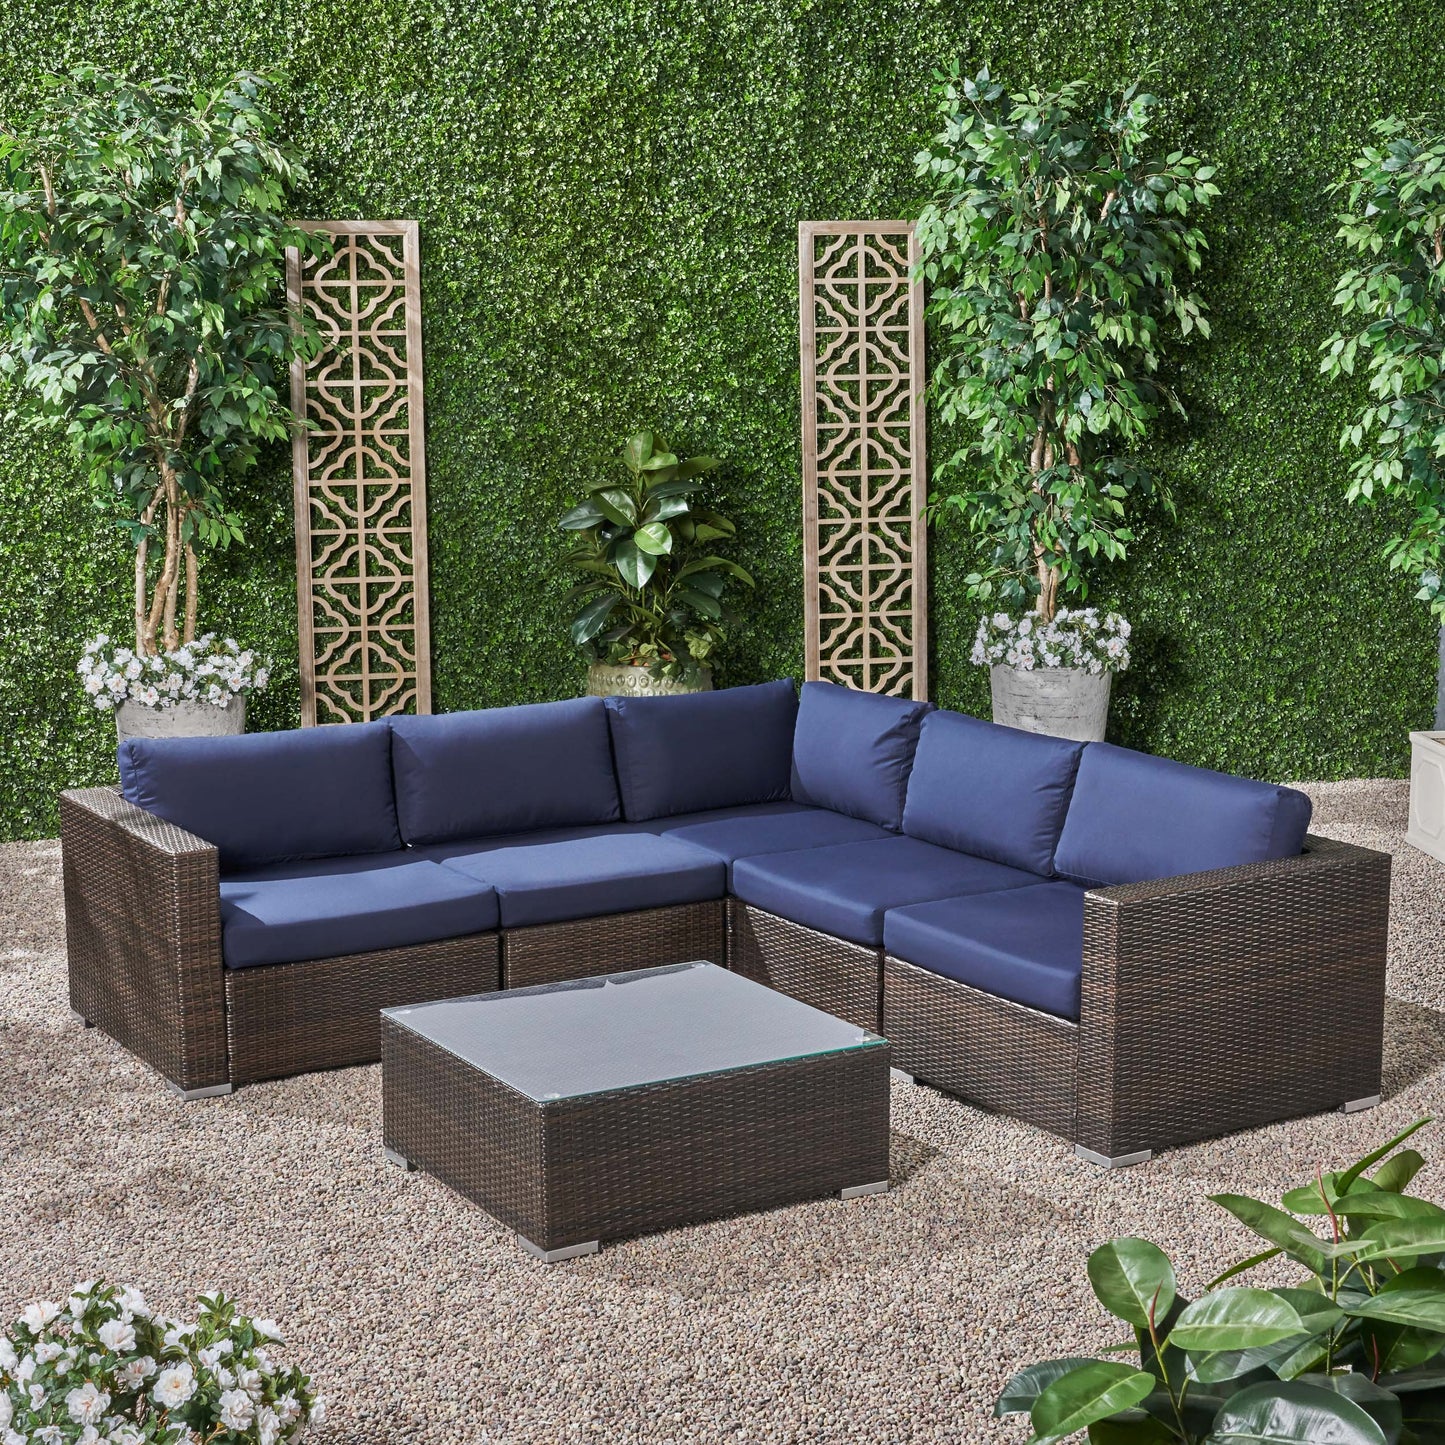 Kyra Outdoor 5 Seater Wicker Sectional Sofa Set with Sunbrella Cushions